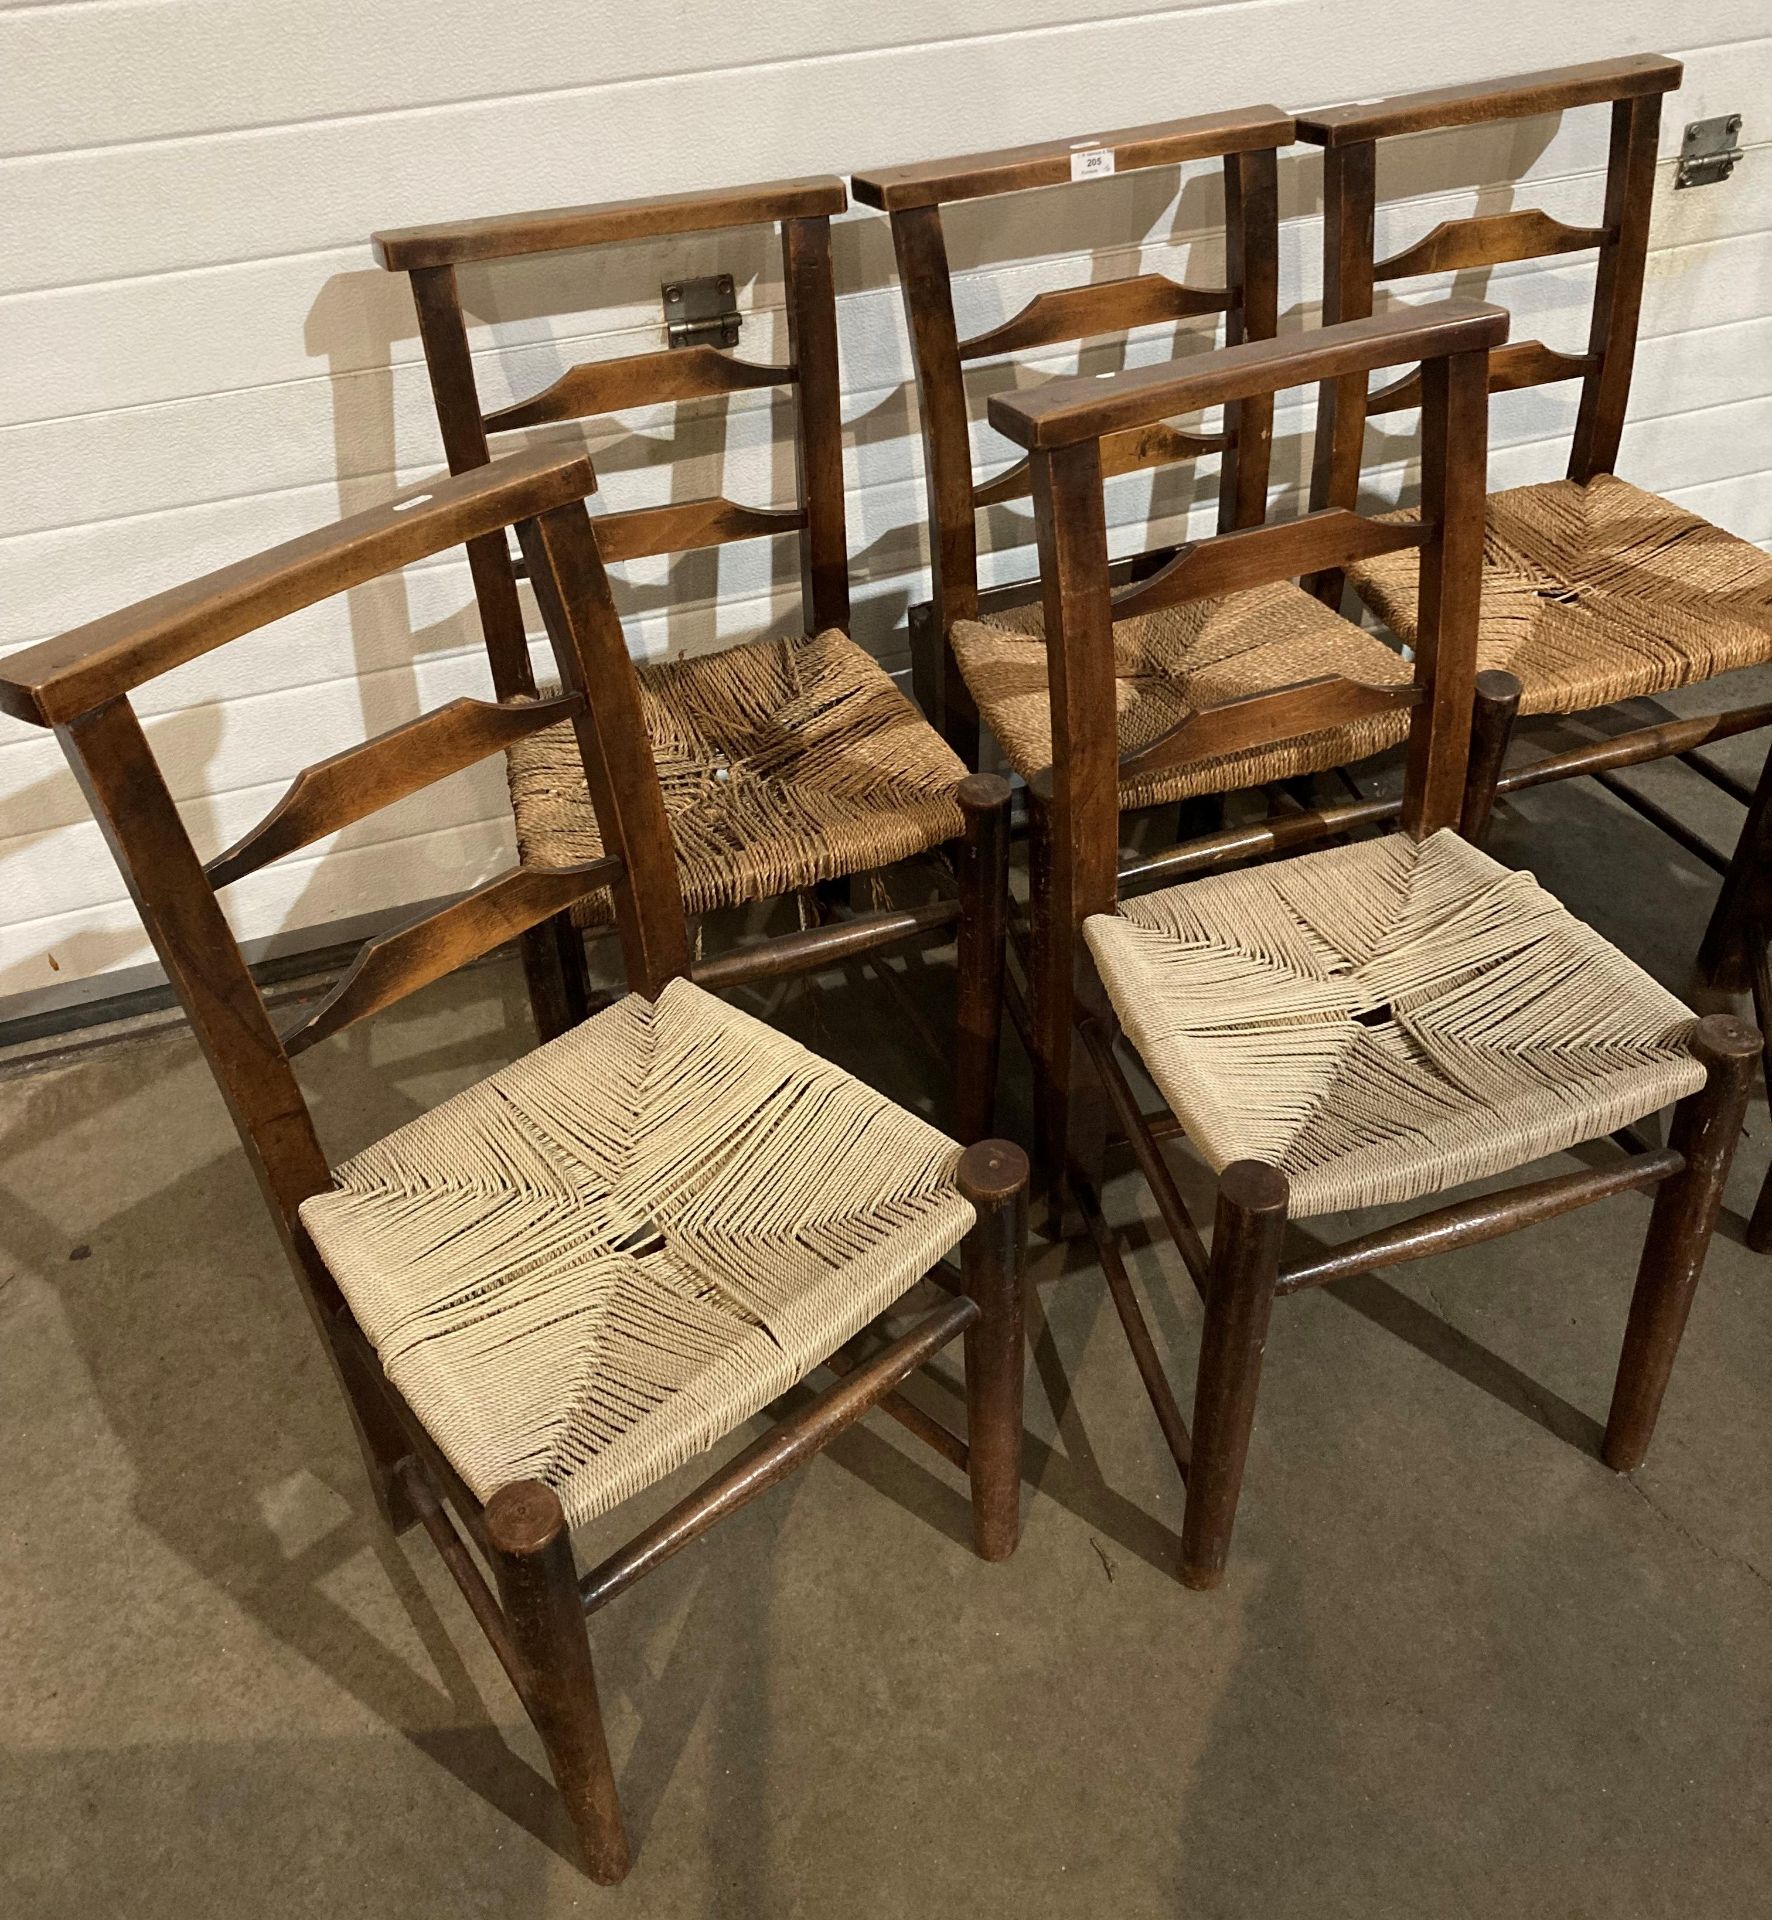 Set of six elm church chairs with re-woven seats and two with book shelves (saleroom location: MA4) - Image 2 of 3